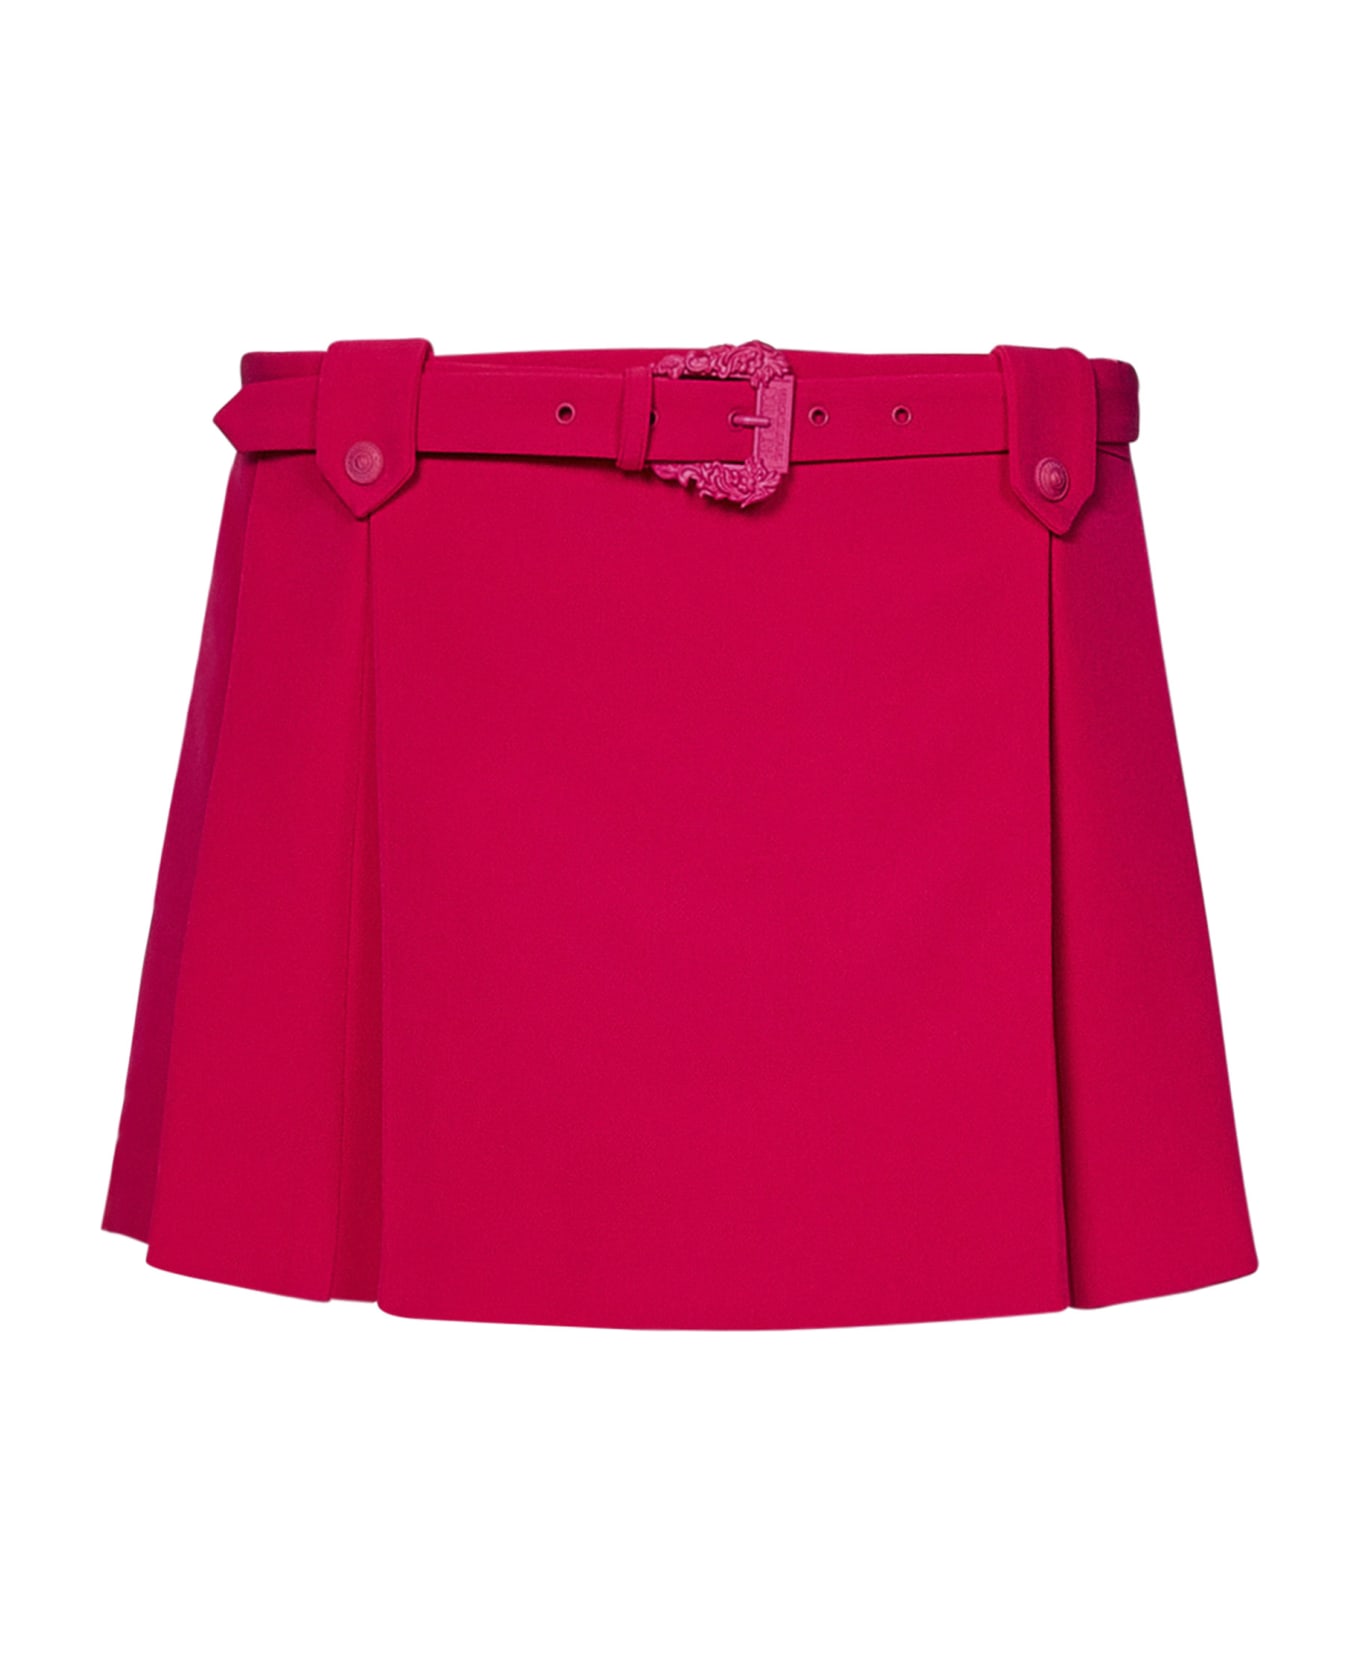 Versace Jeans Couture Skirt - Hot Pink スカート